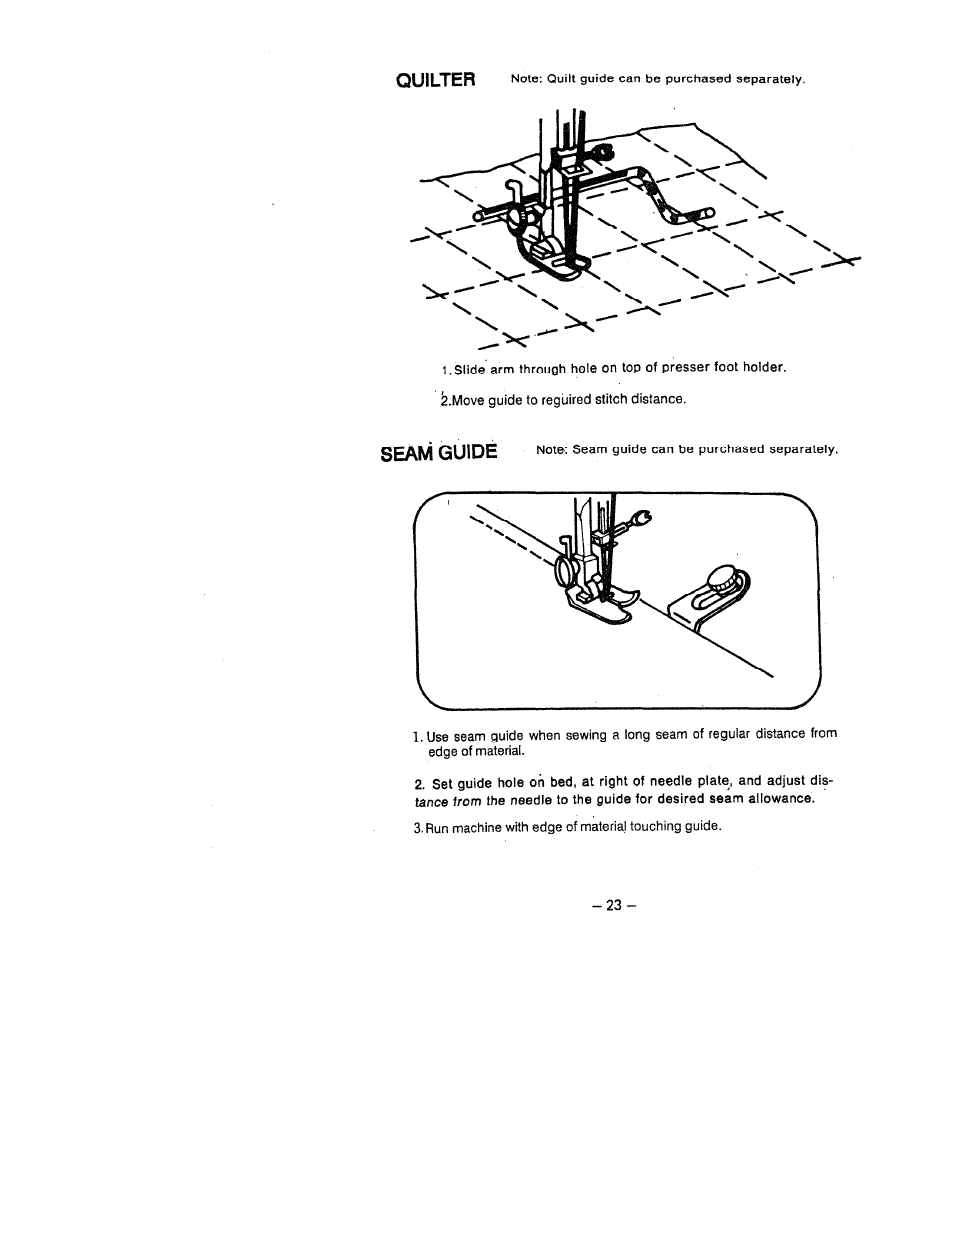 Quilter, Seam guide | SINGER W1418 User Manual | Page 27 / 31